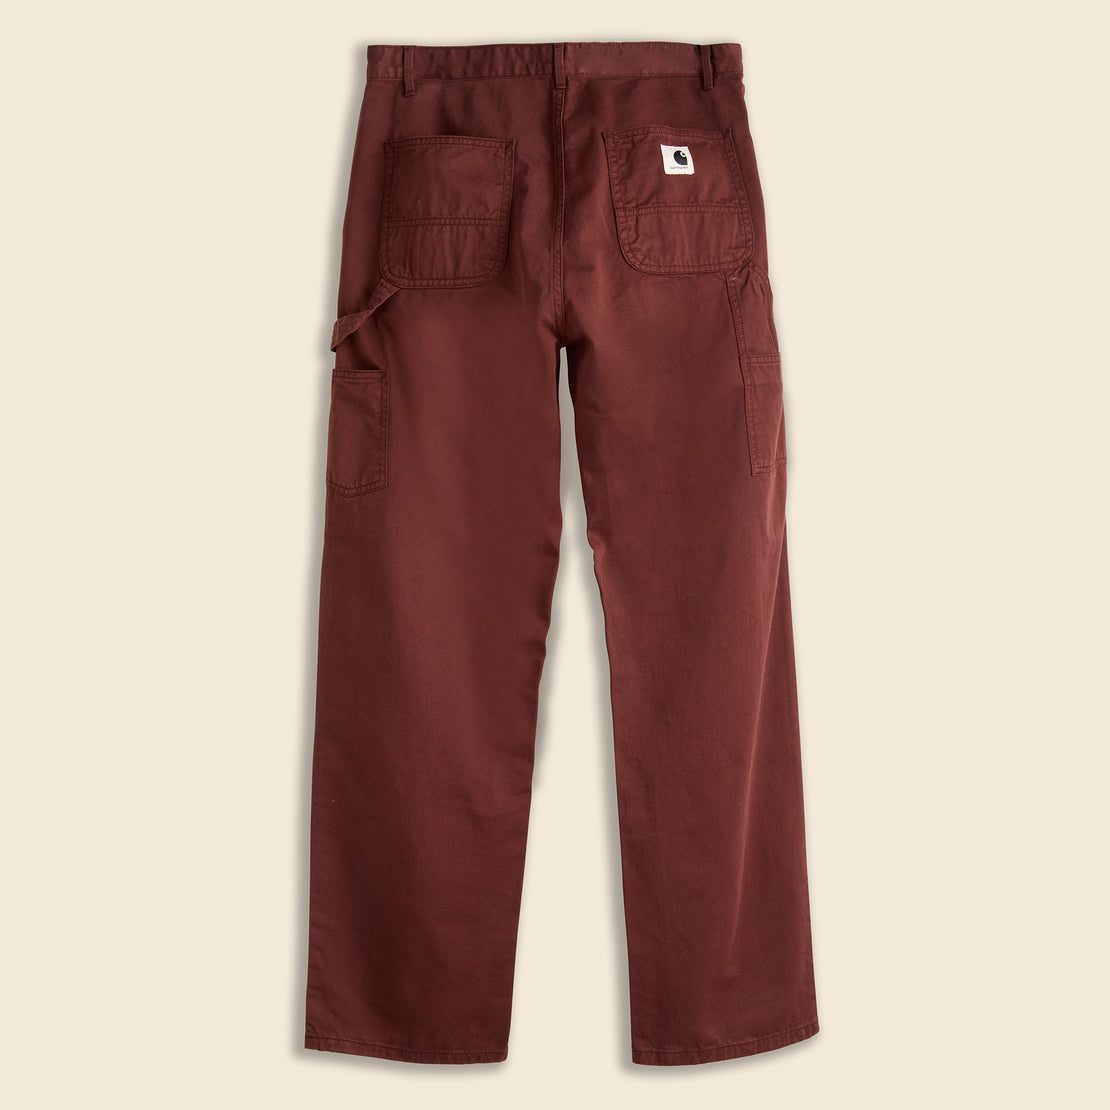 Pierce Pant Straight - Ale - Carhartt WIP - STAG Provisions - W - Pants - Twill